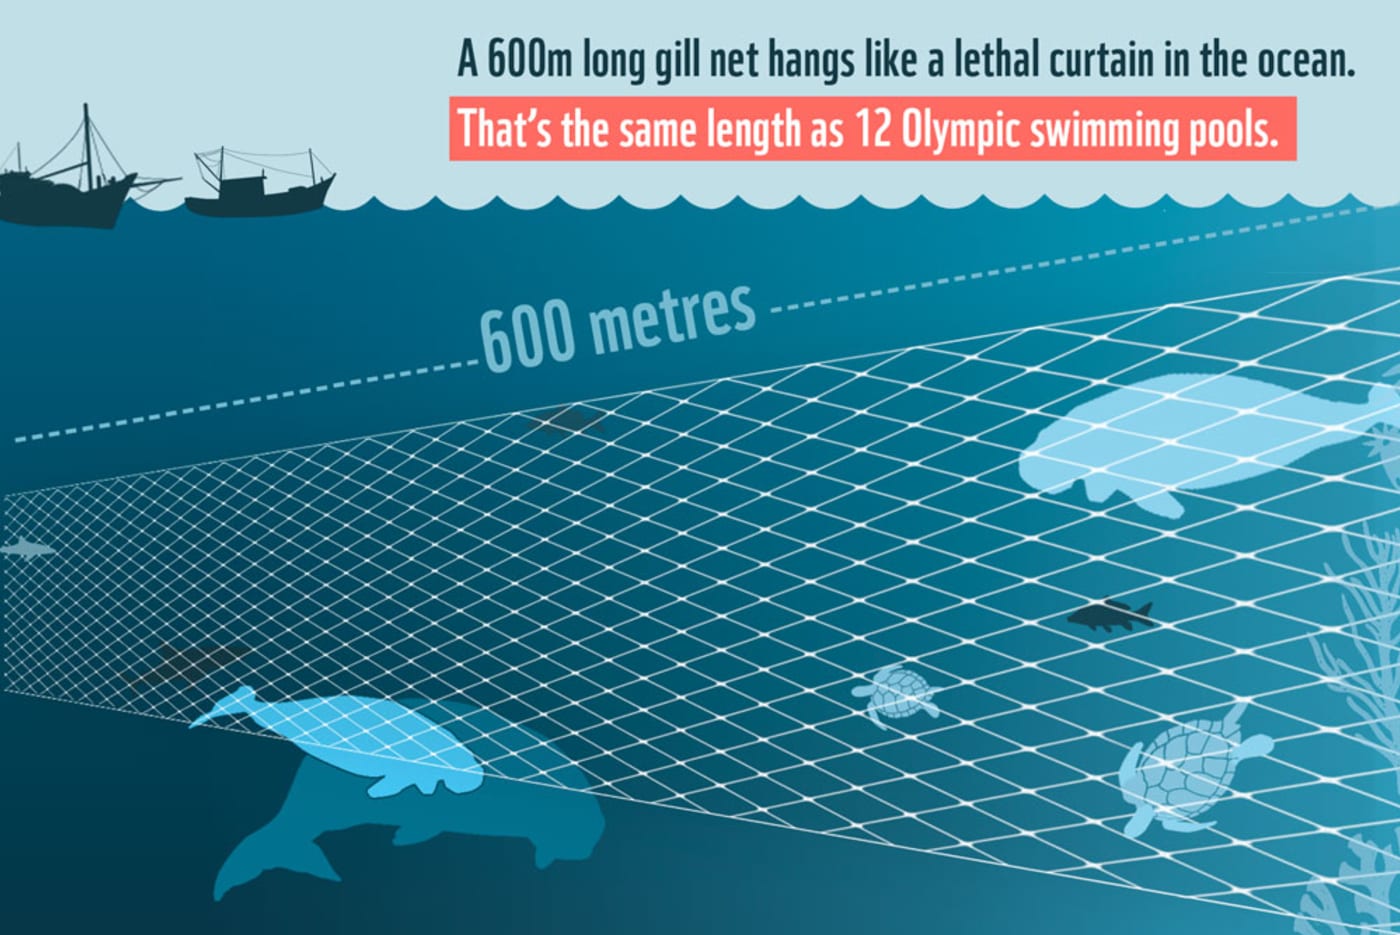 A 600m gill net hangs like a lethal curtain in the ocean